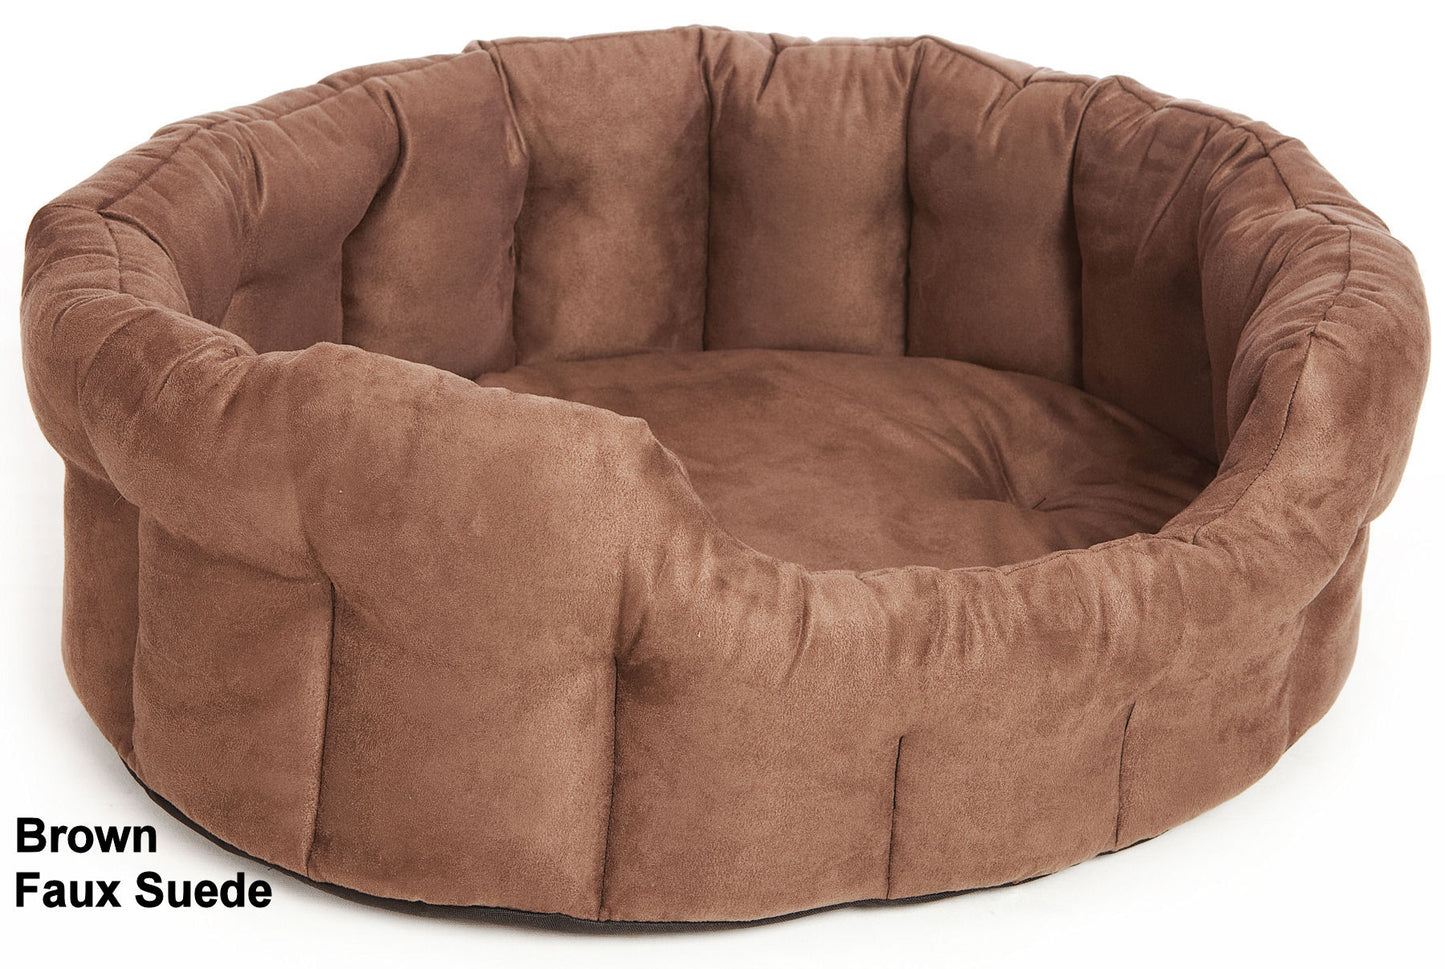 P&L Premium Heavy Duty Drop Fronted Oval Faux Suede Softee Dog Beds